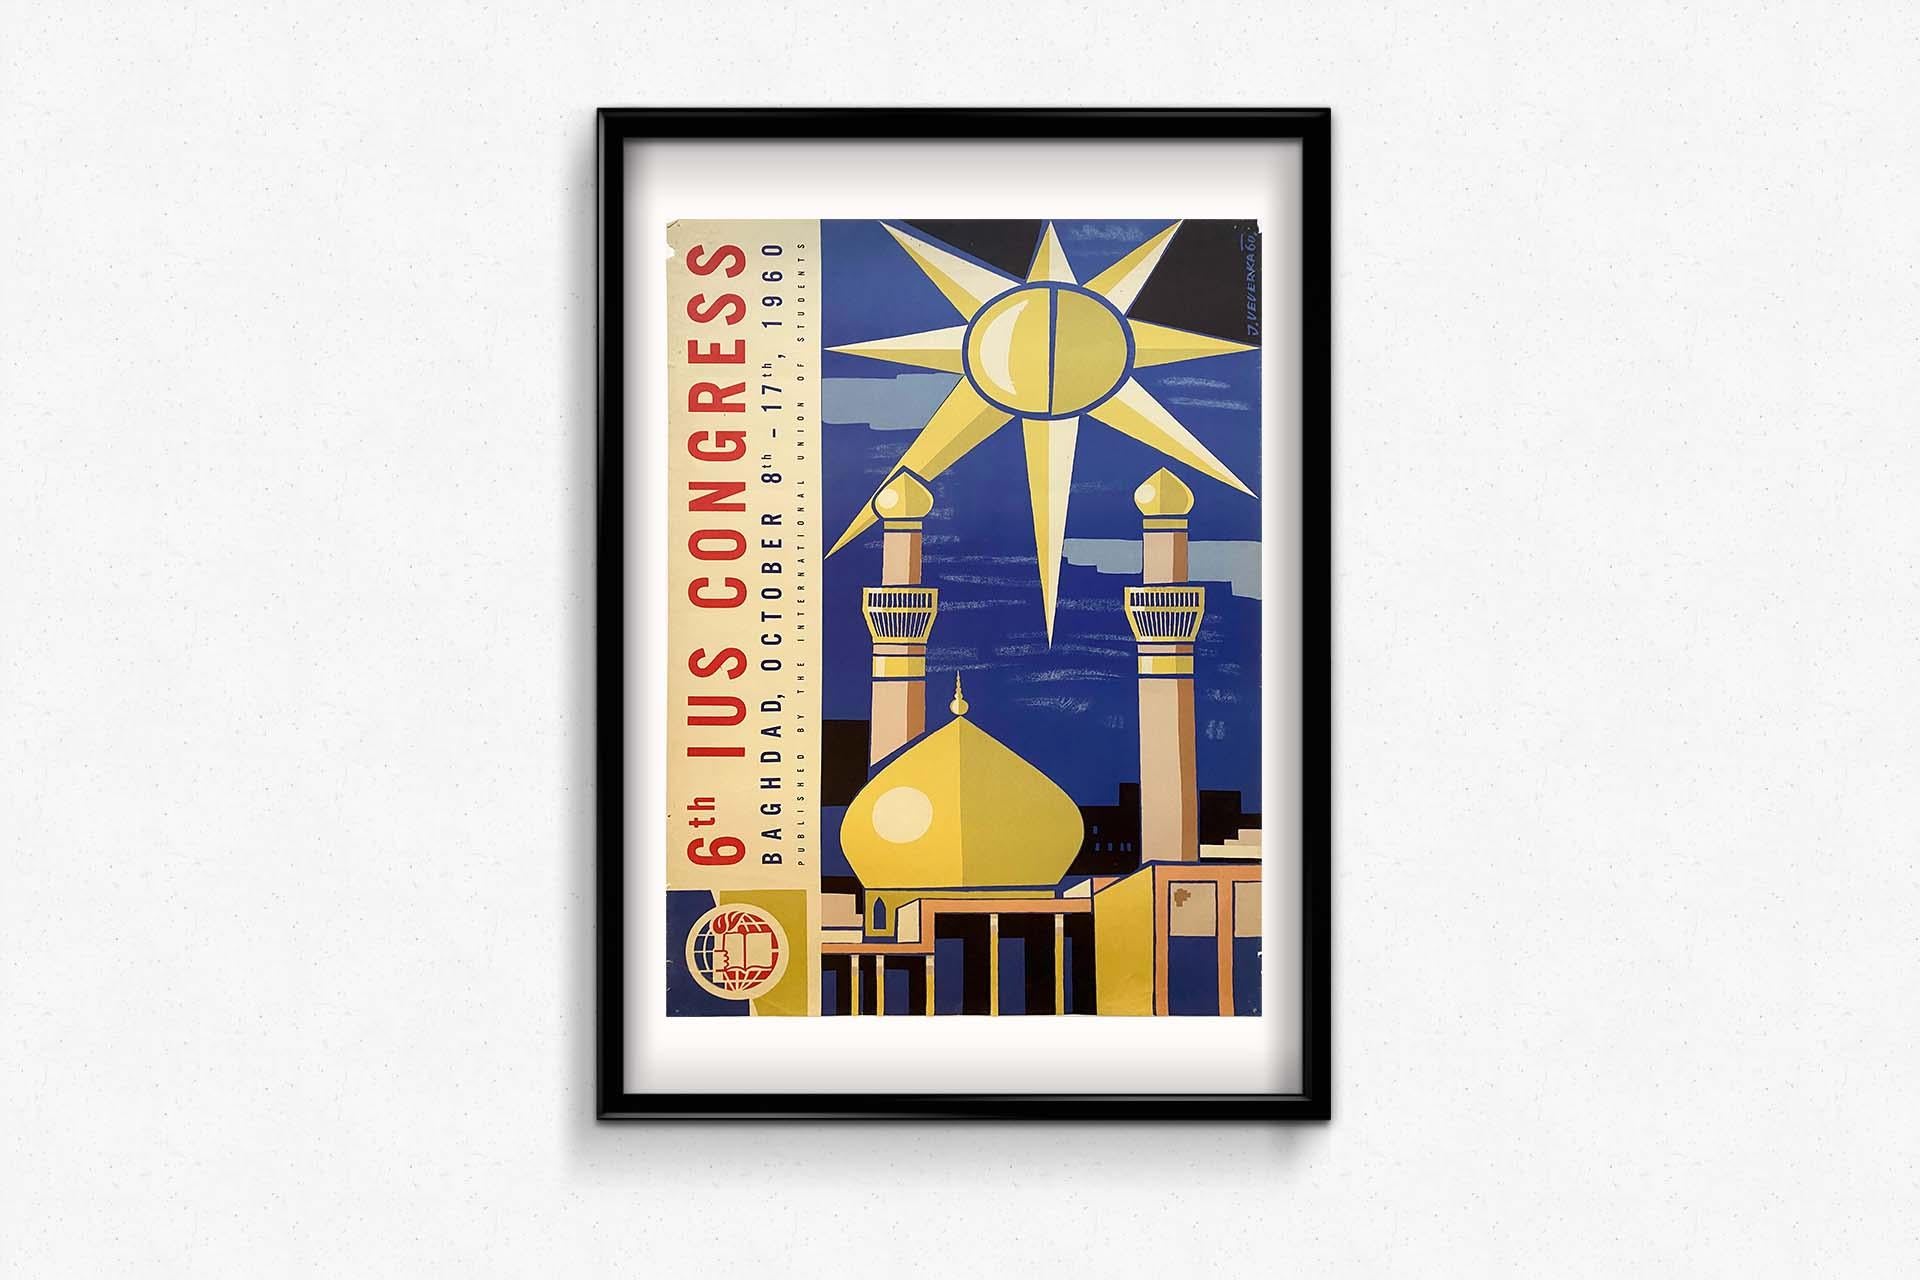 This poster was made to promote the 6th IUS Congress which took place from October 8 to 17, 1960 in Baghdad, Iraq.
The International Union of Students (IUS) is a non-partisan world association of university student organizations.

IUS is the parent